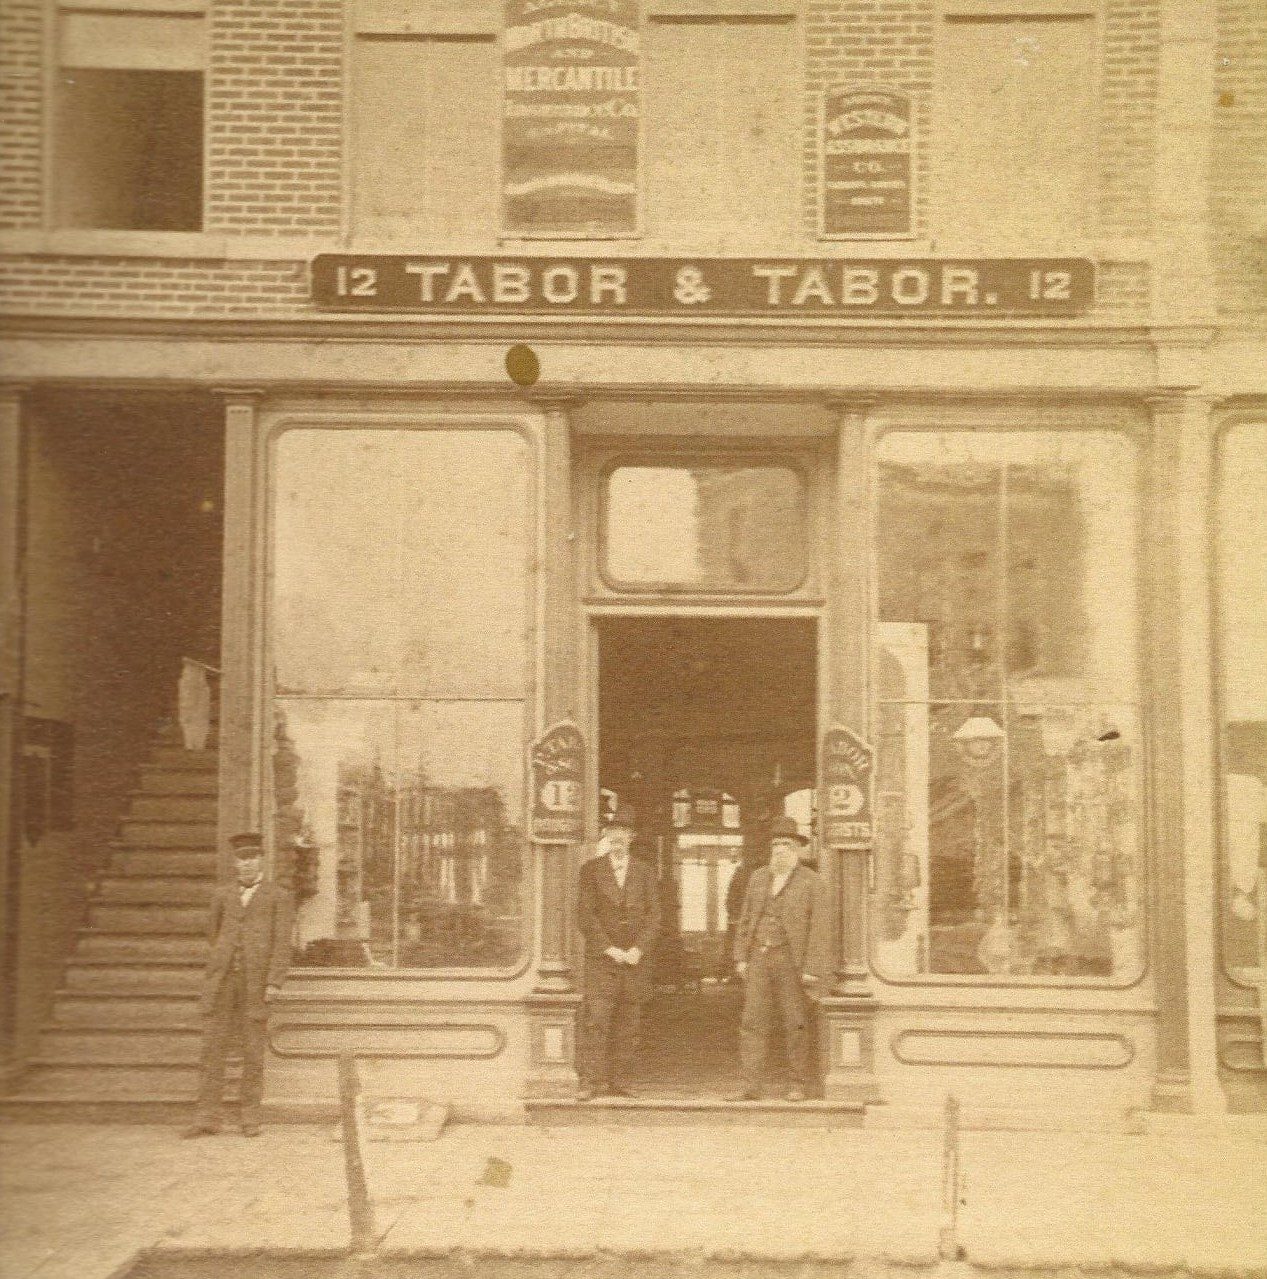 Tabor & Tabor (12 Main St.) - B.W. (Byron W.) Tabor druggist & stationer. Now 115 1st St. E (Ohl Realty). Byron Tabor was also the time-keeper for all the races at the kite track.